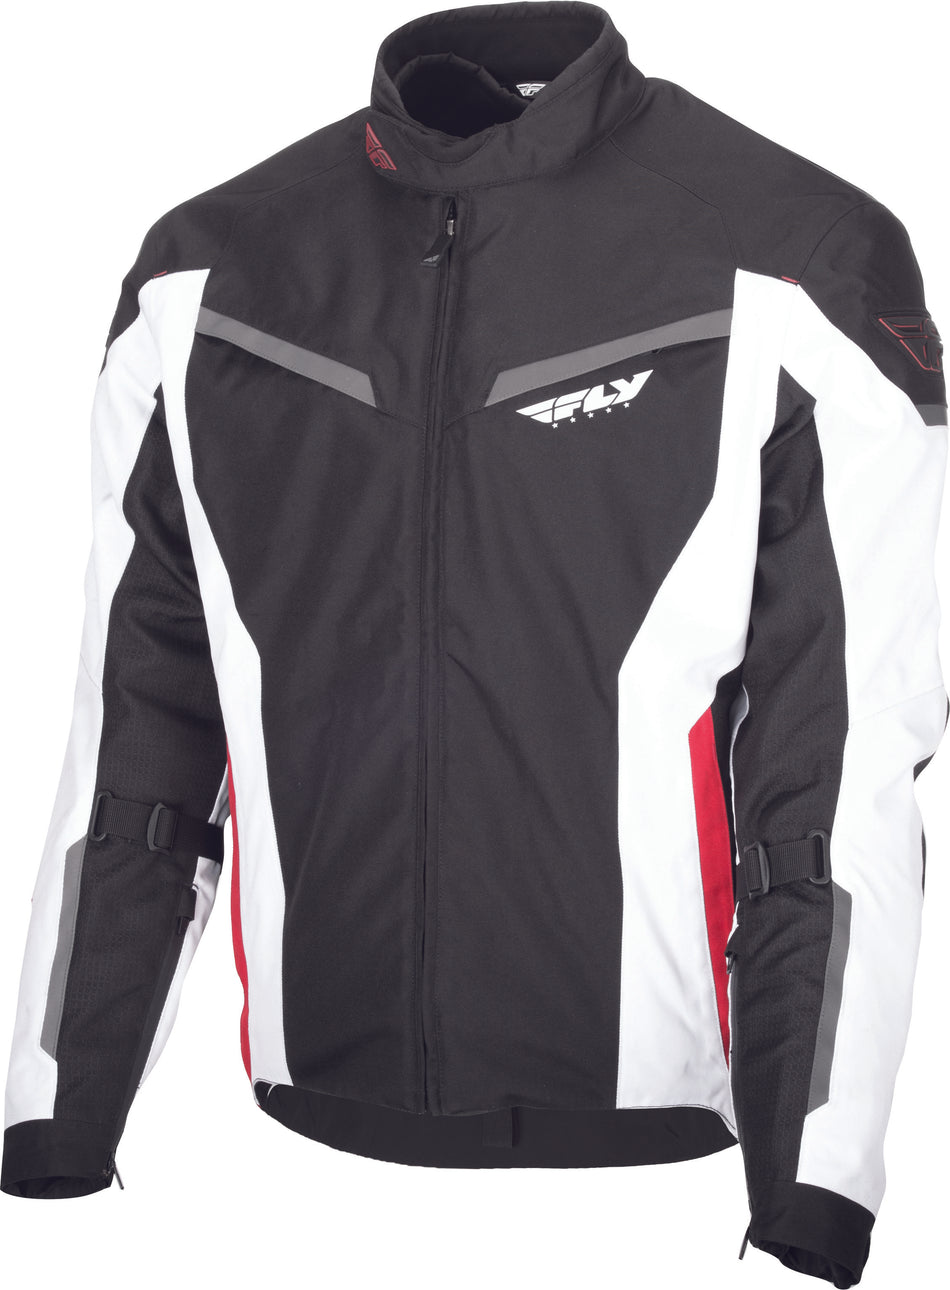 FLY RACING Strata Jacket Black/White/Red 3x 477-2101-7